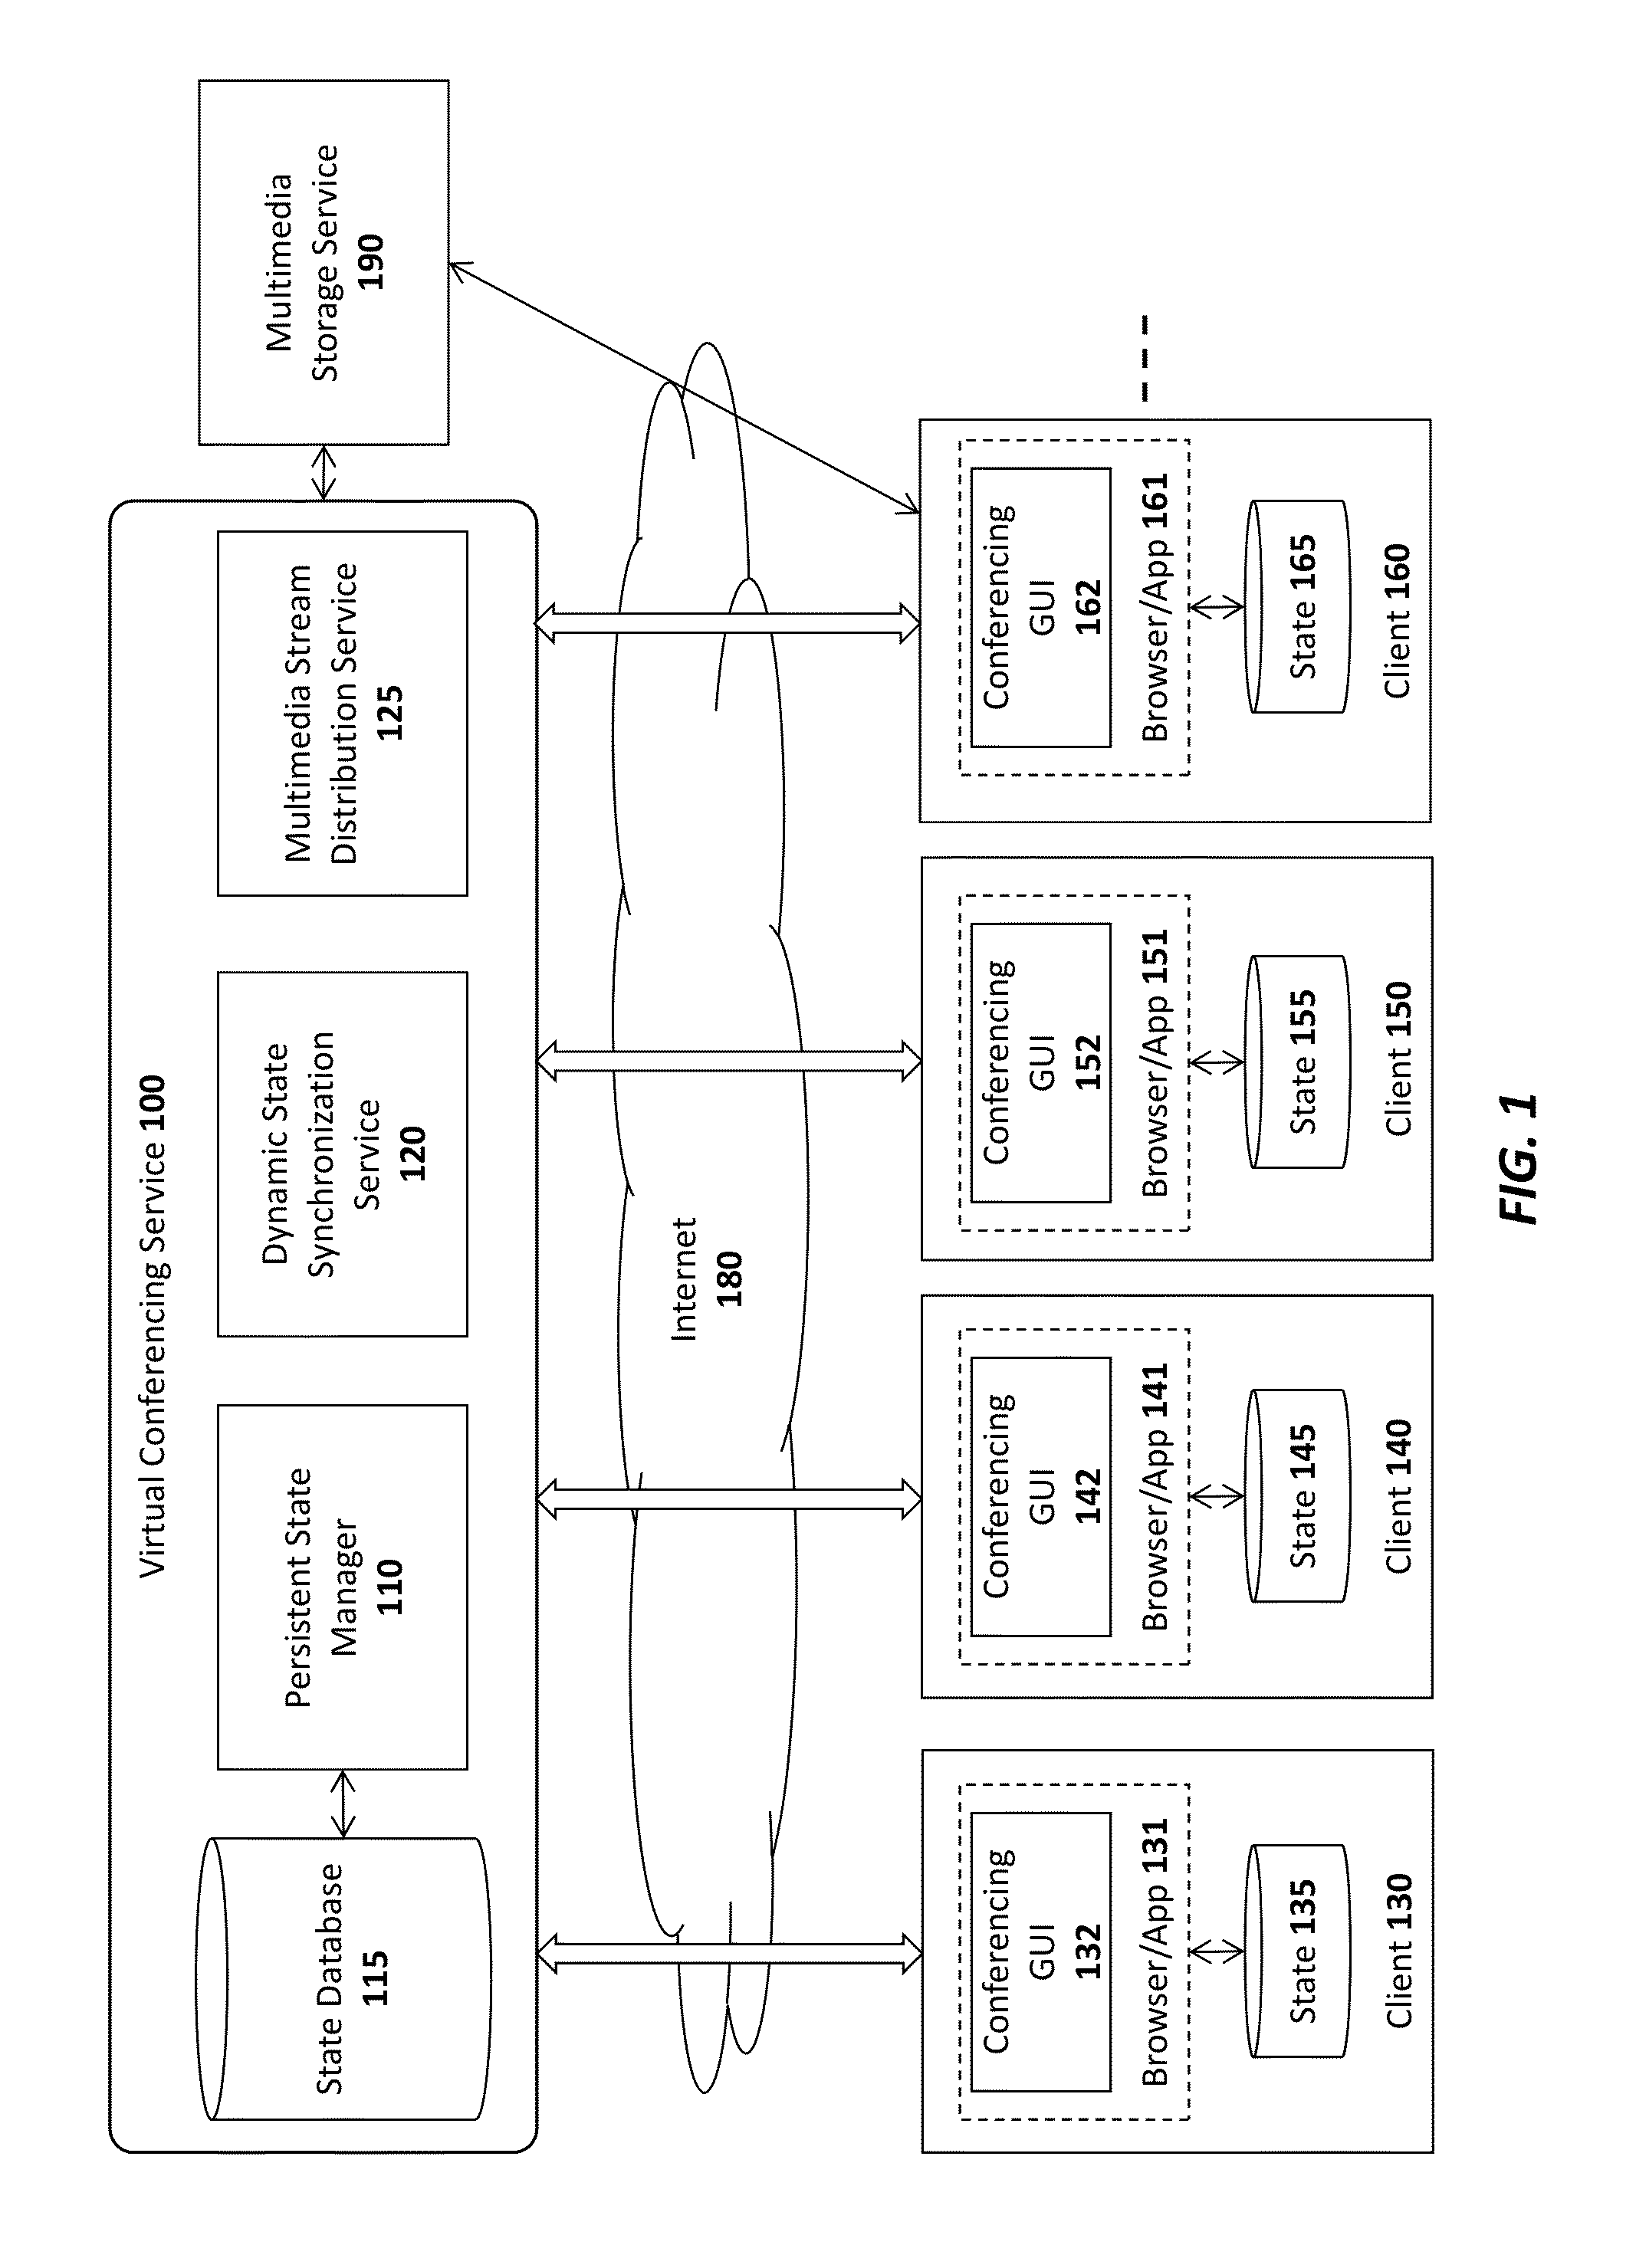 System and method for tracking events and providing feedback in a virtual conference